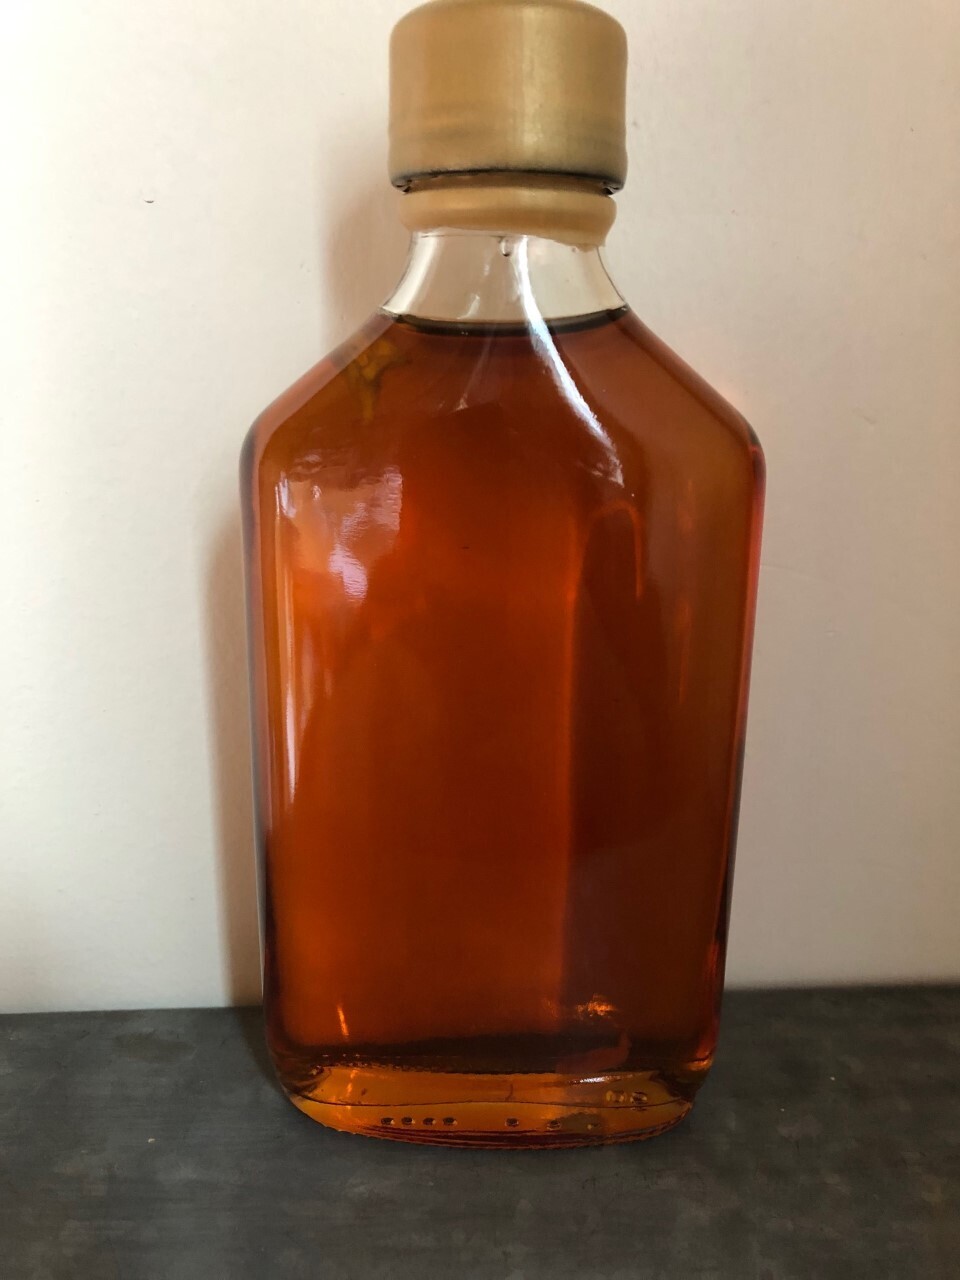 Ginger Infused Maple Syrup